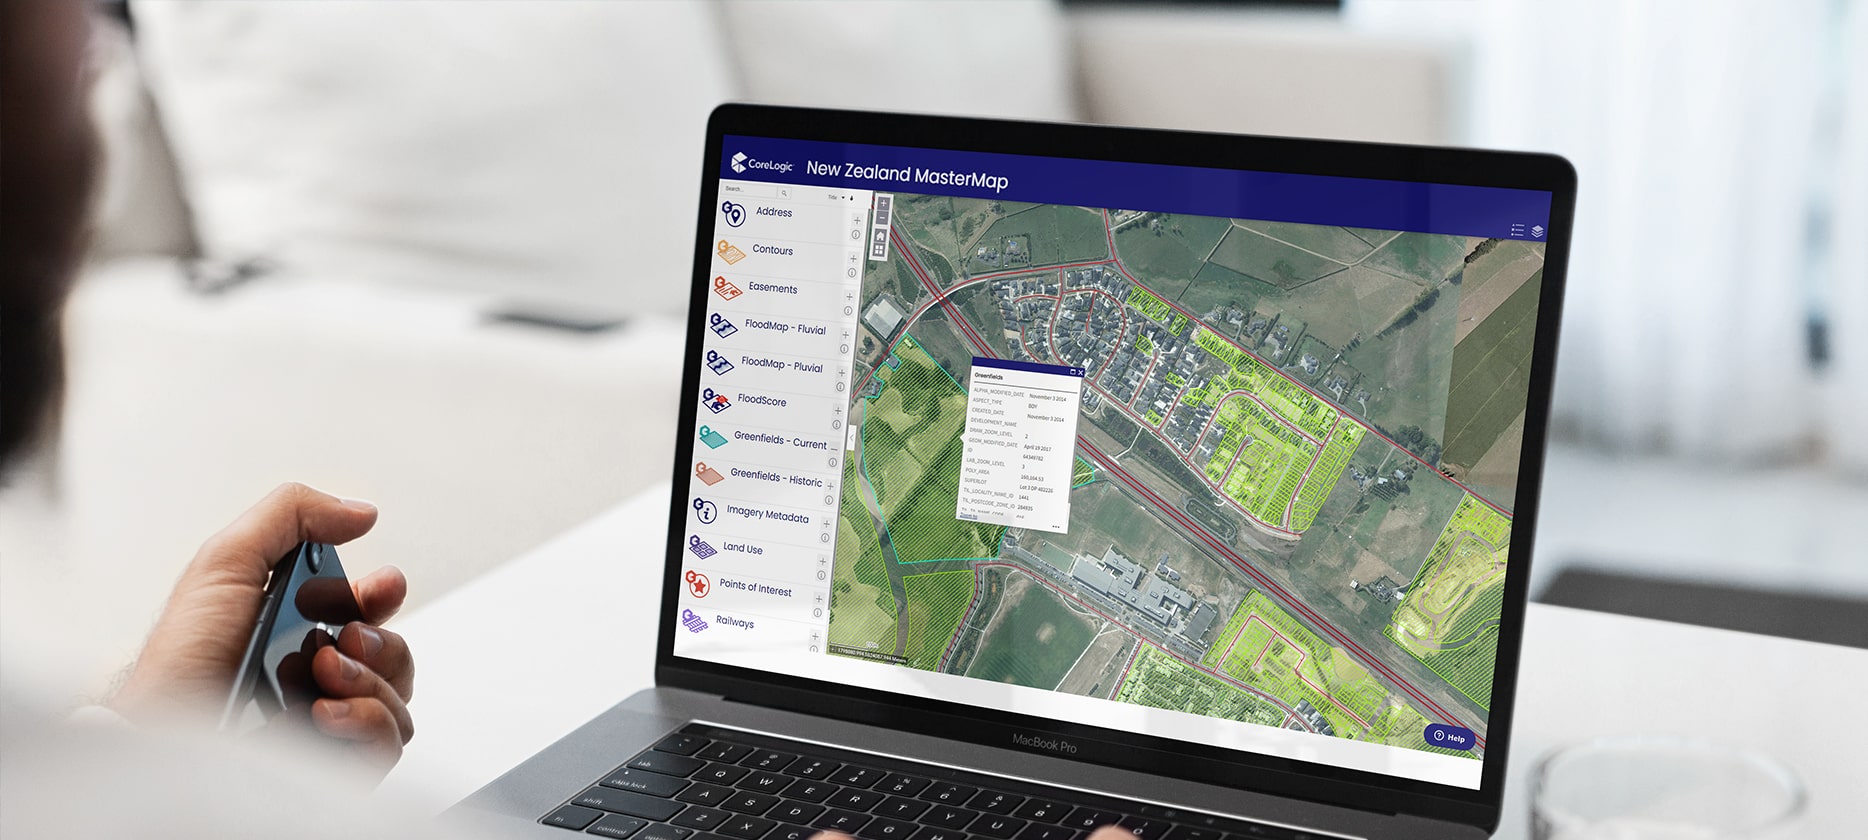 Experience the power of NZ’s most comprehensive geospatial data